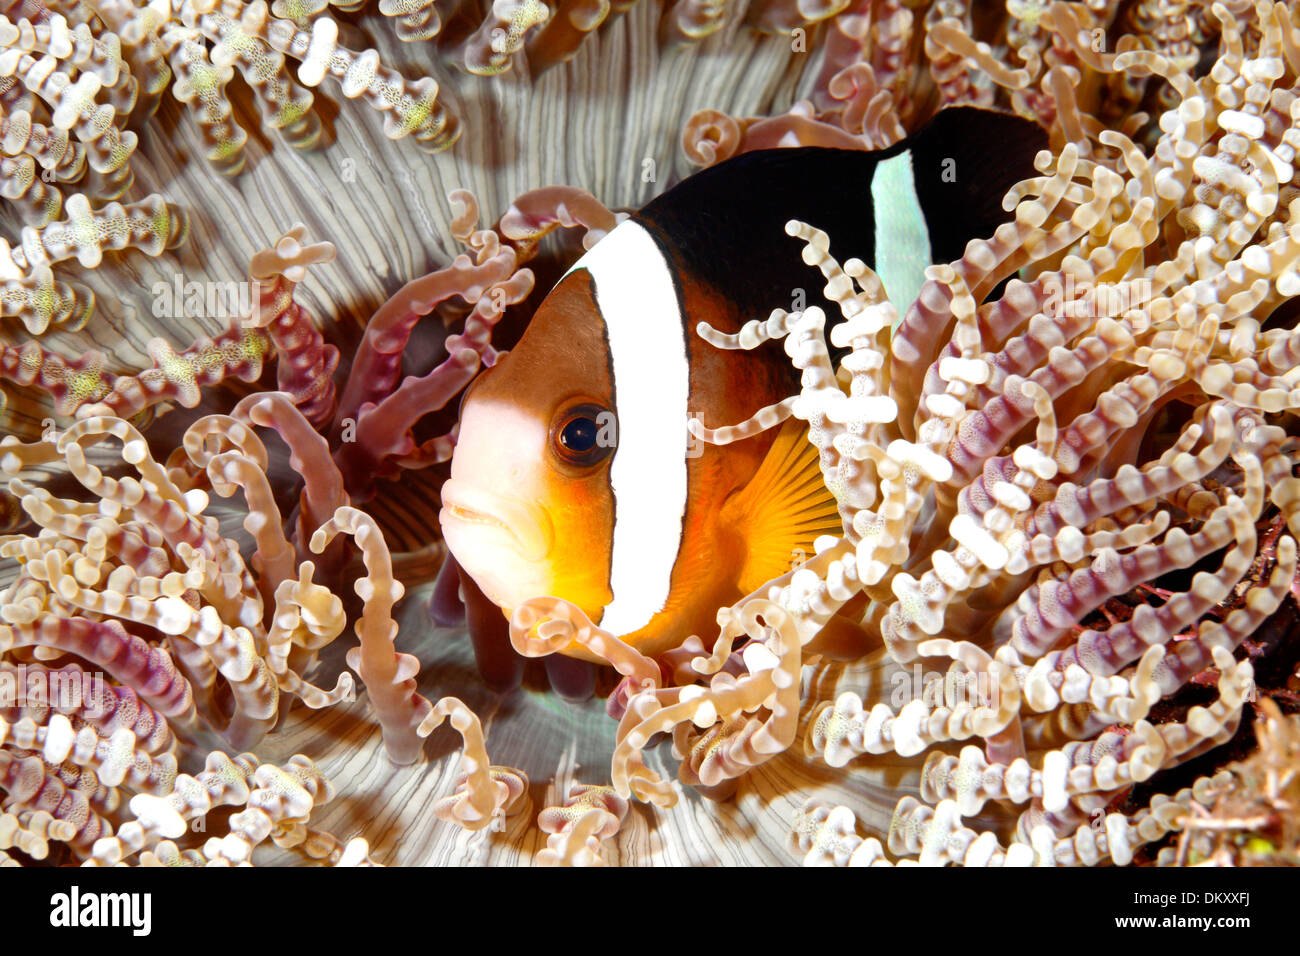 Clark's Anemonefish, or Clownfish, Amphiprion clarkii, sheltering among the tentacles of its host anemone. Tulamben, Bali Stock Photo